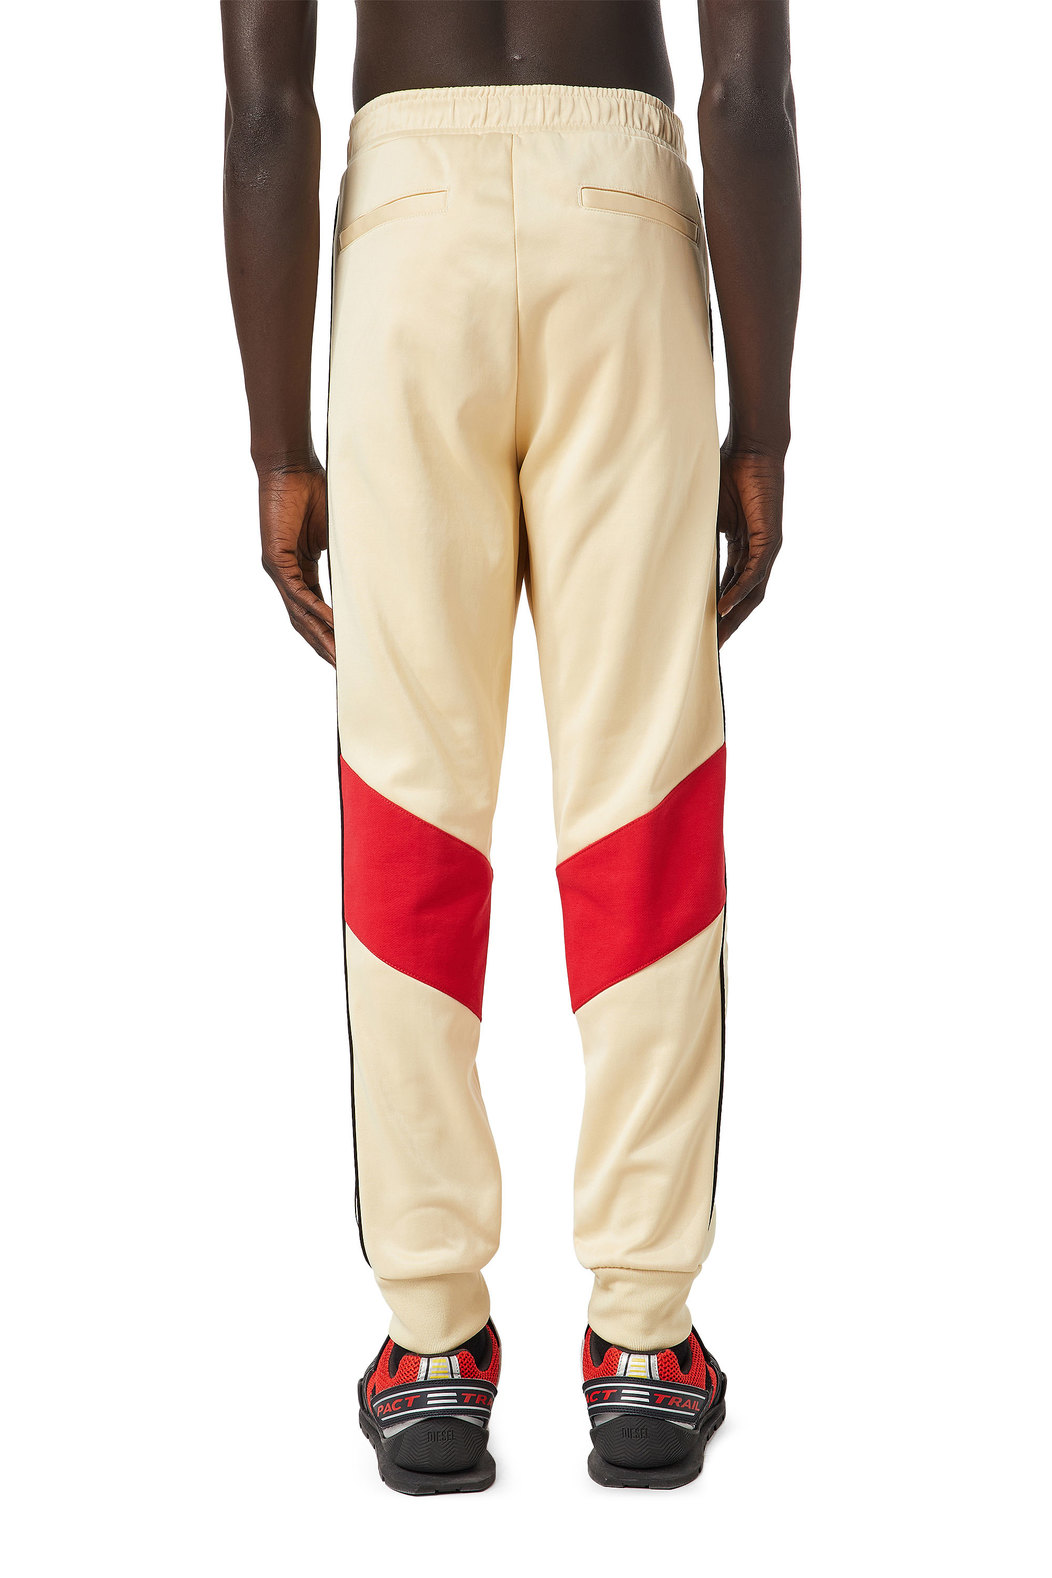 Double-knit sweatpants with piped bands